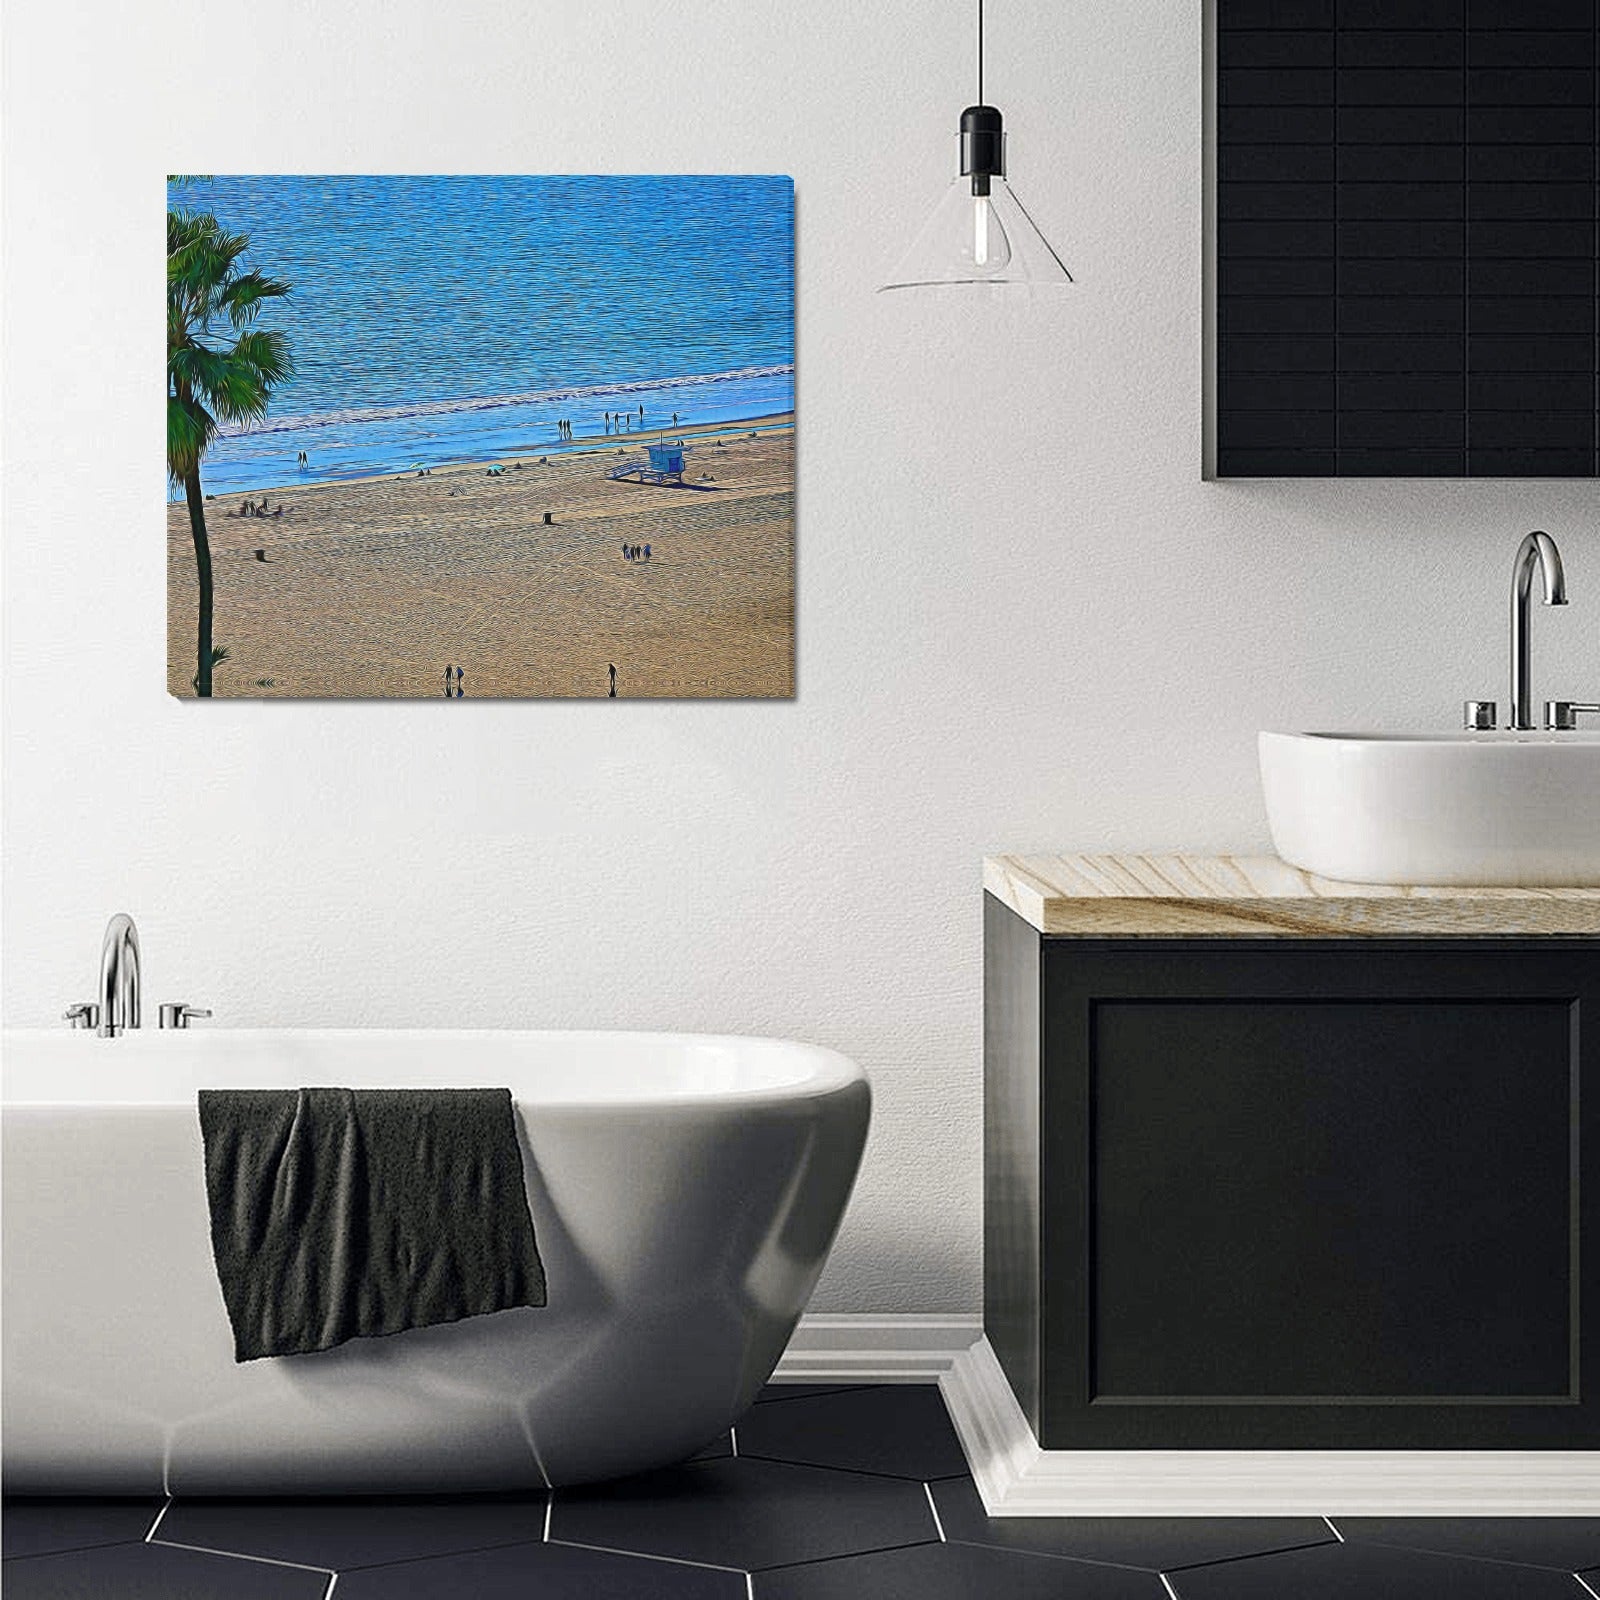 From The Palisades to the Sand into the Ocean | Frame Canvas Print 24"x20"  | Made in the USA | Santa Monica Based Artist - Art Meets Apparel